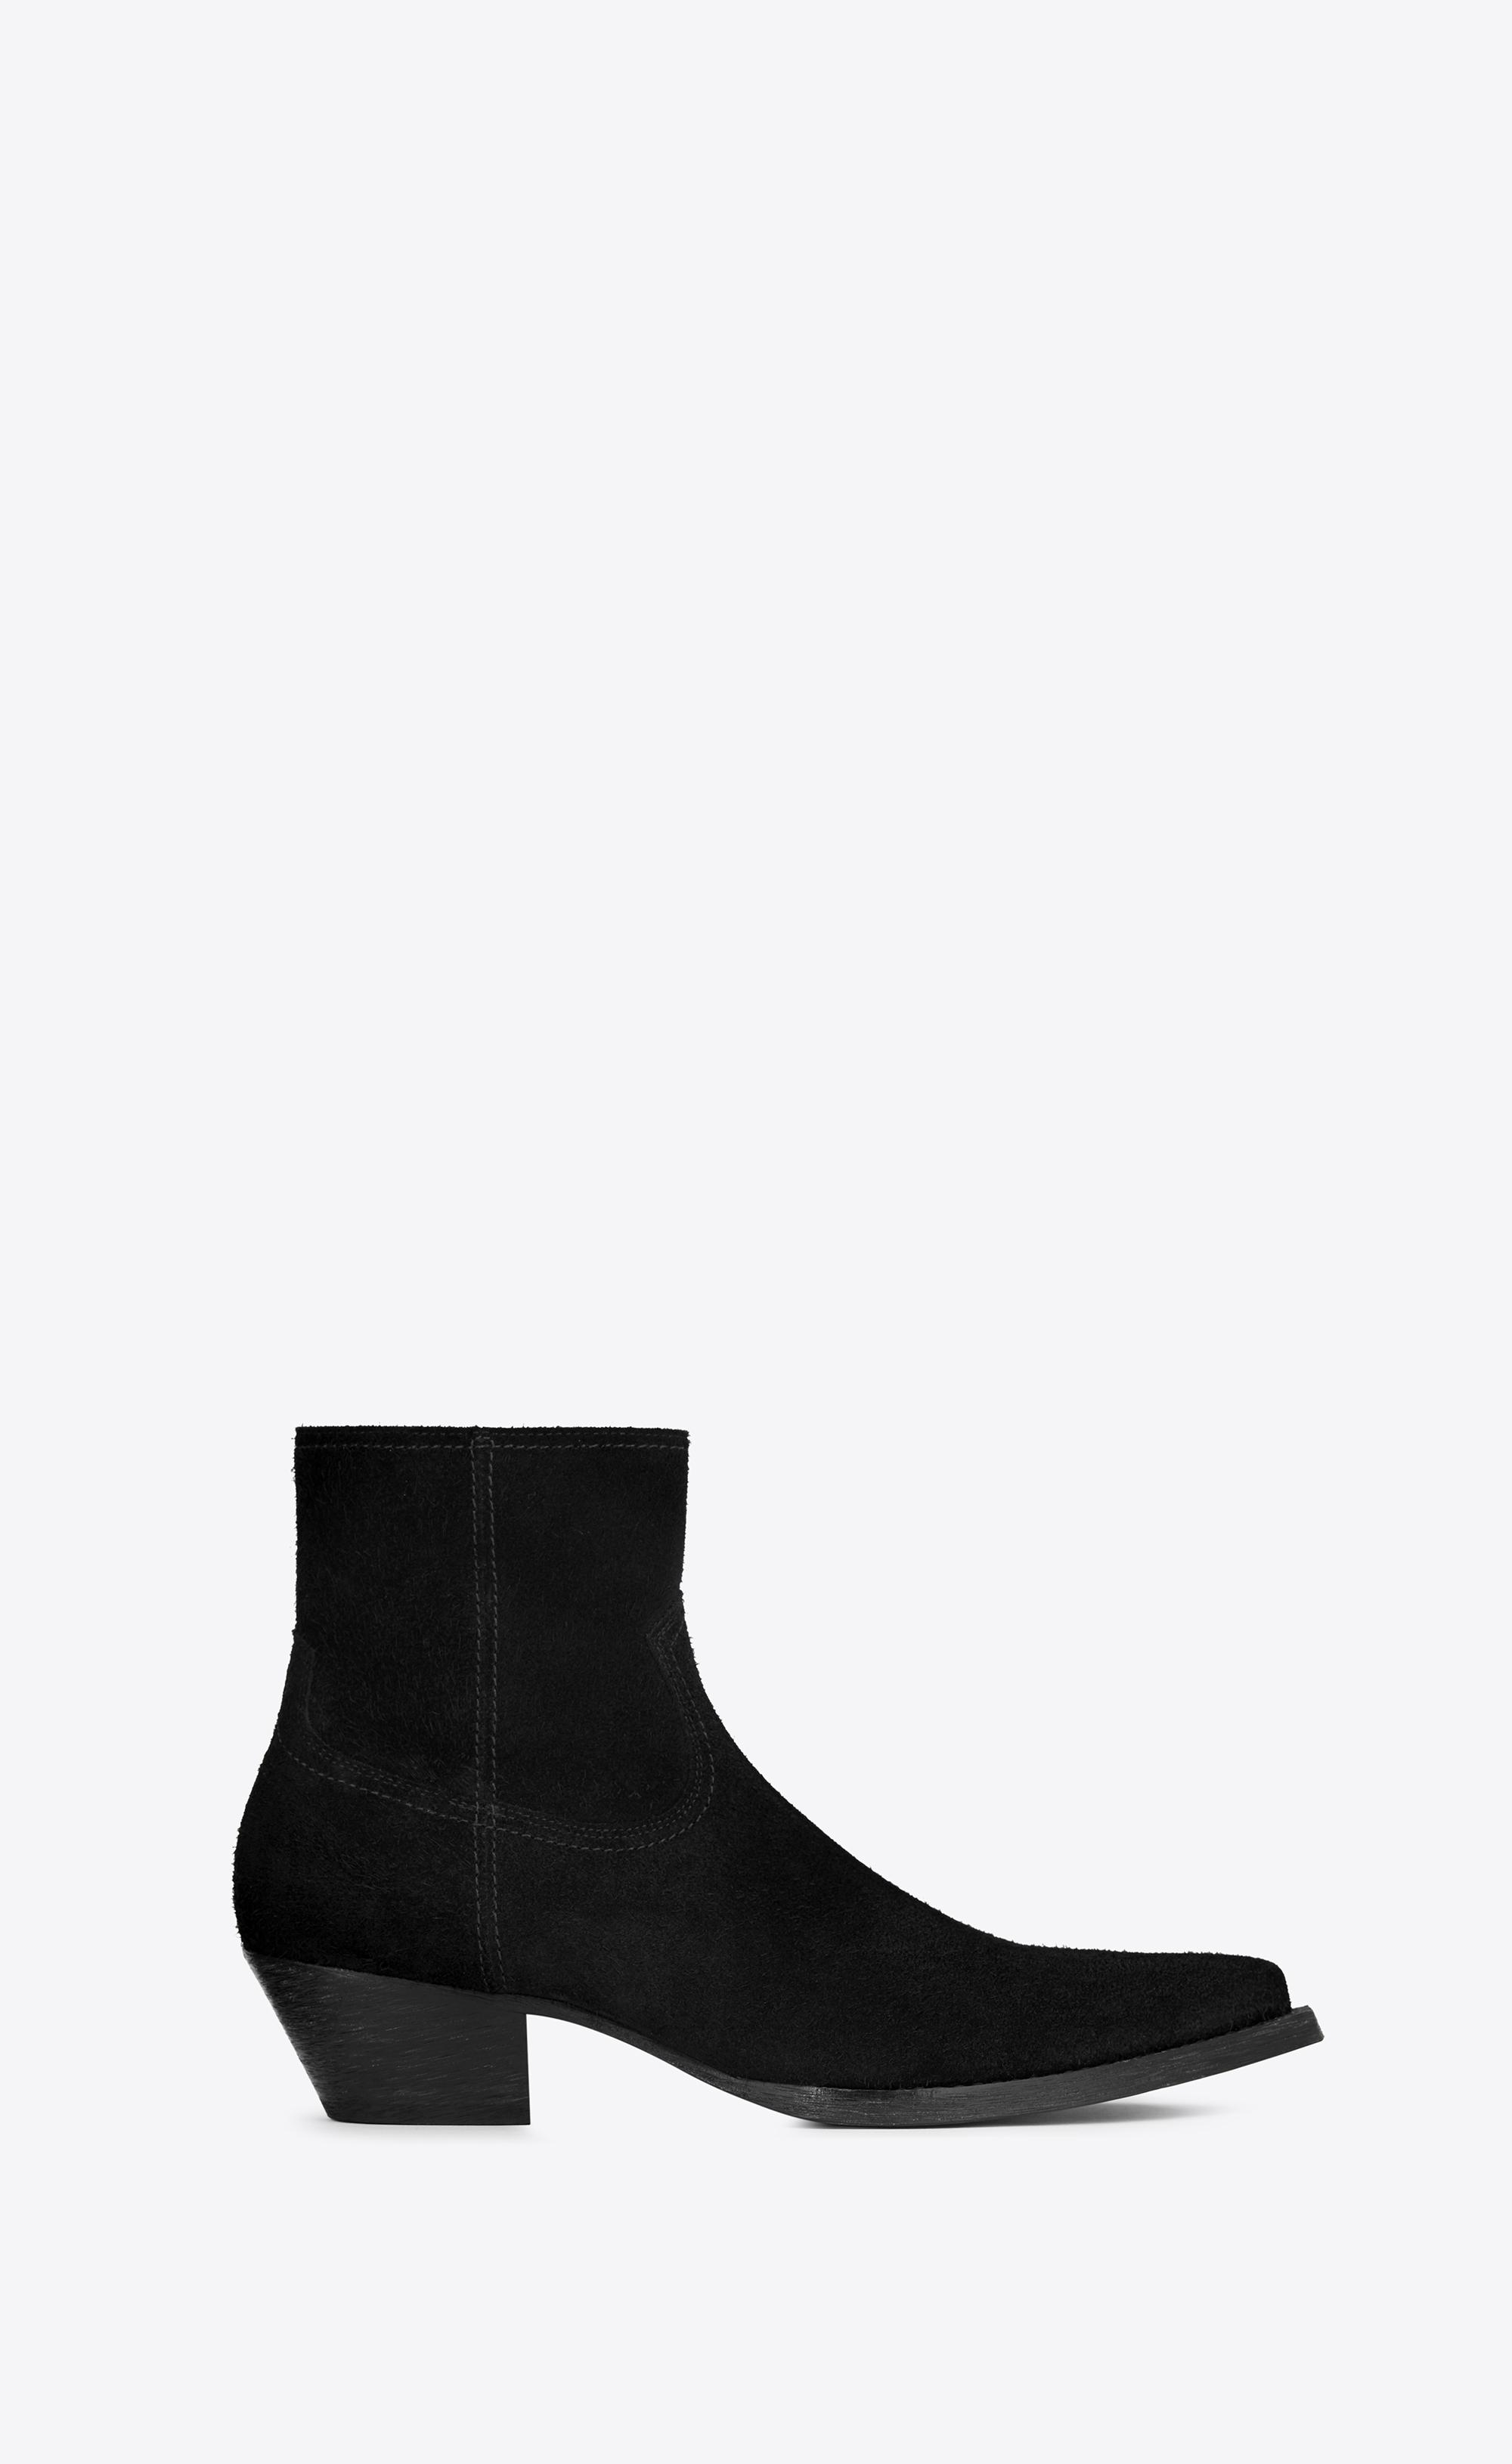 Saint Laurent Lukas Boots In Suede in Black for Men - Save 1% - Lyst